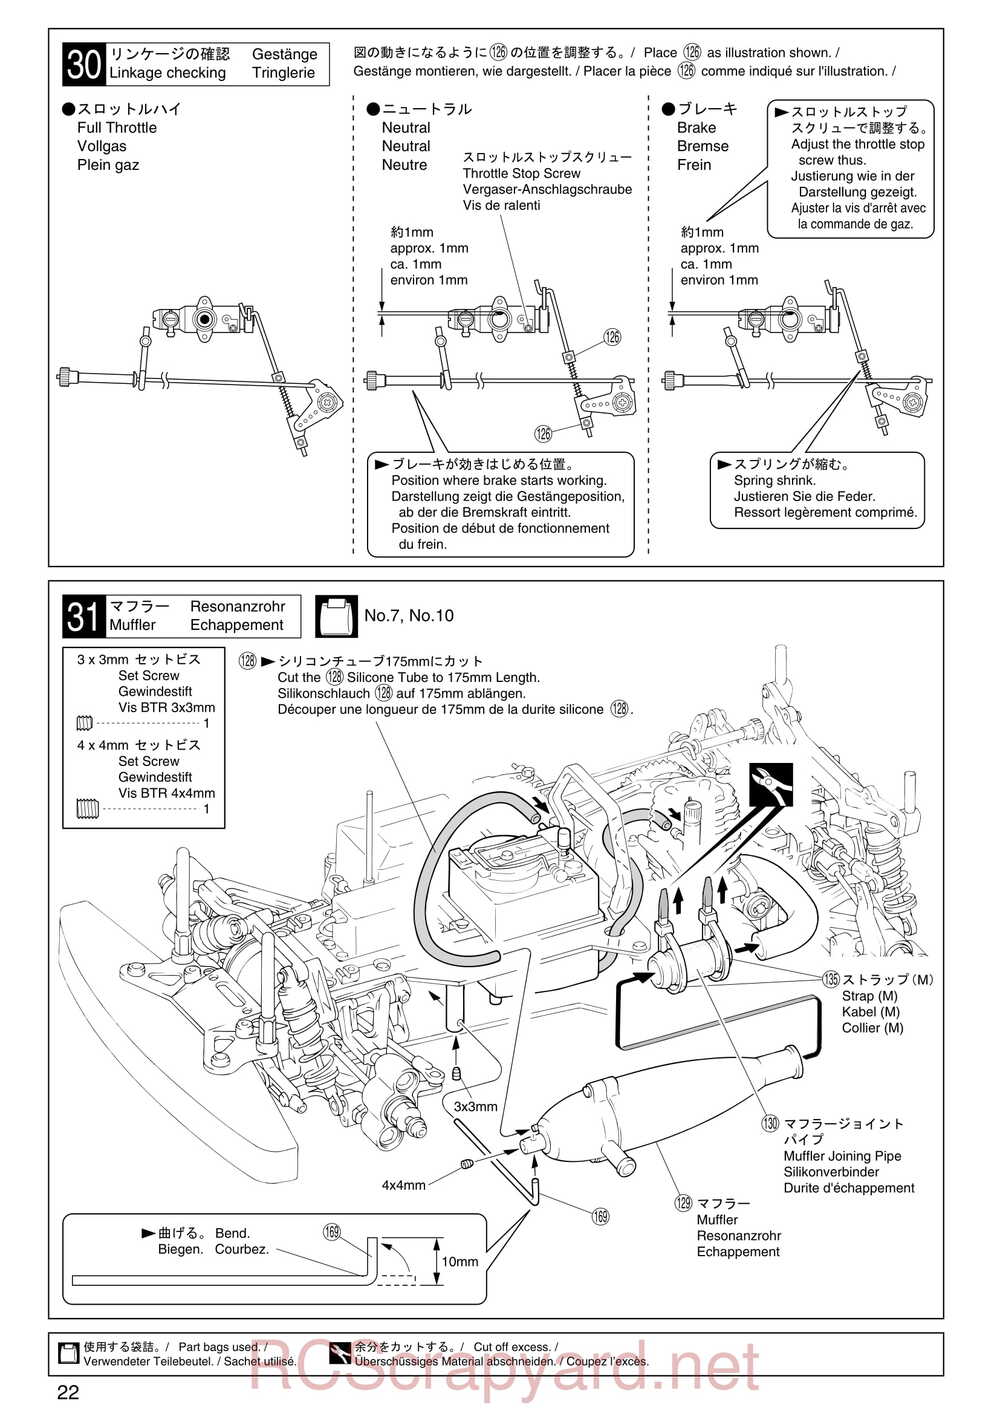 Kyosho - 31122 - V-One S2 - Manual - Page 22